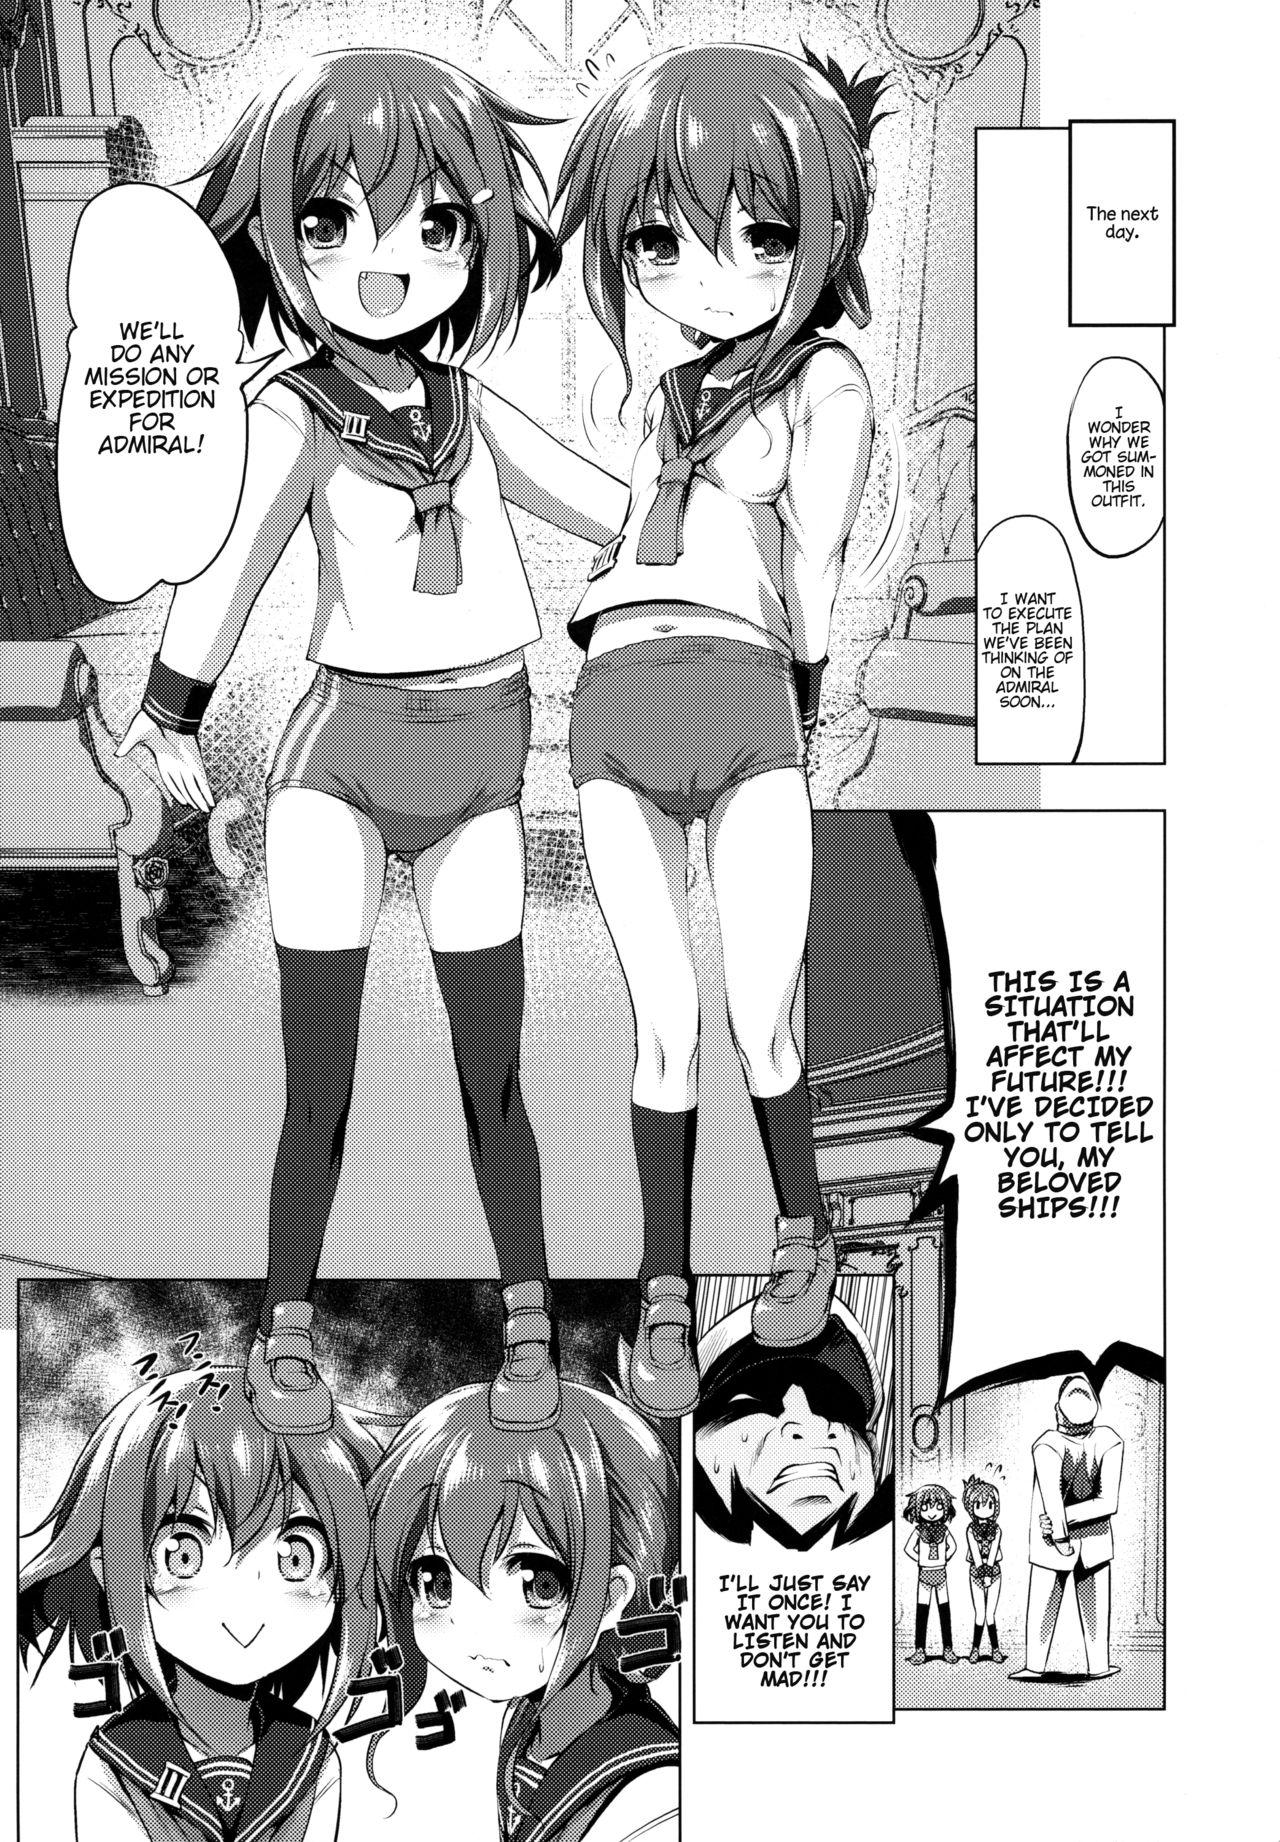 Workout Byuubyuu Destroyers! - Kantai collection Free 18 Year Old Porn - Page 4